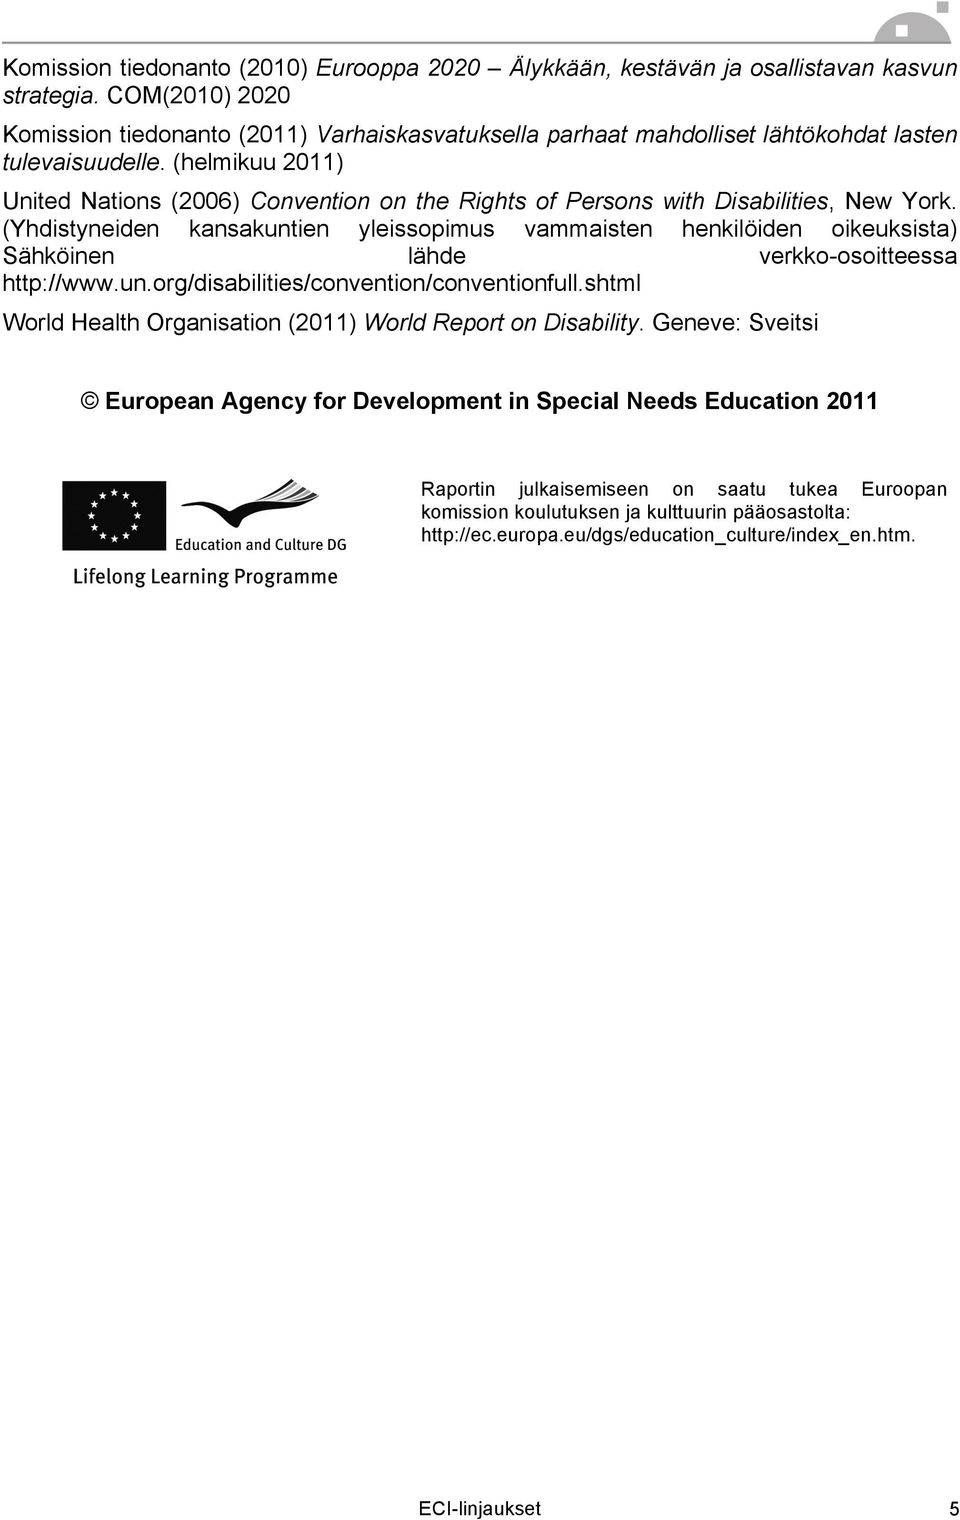 (helmikuu 2011) United Nations (2006) Convention on the Rights of Persons with Disabilities, New York.